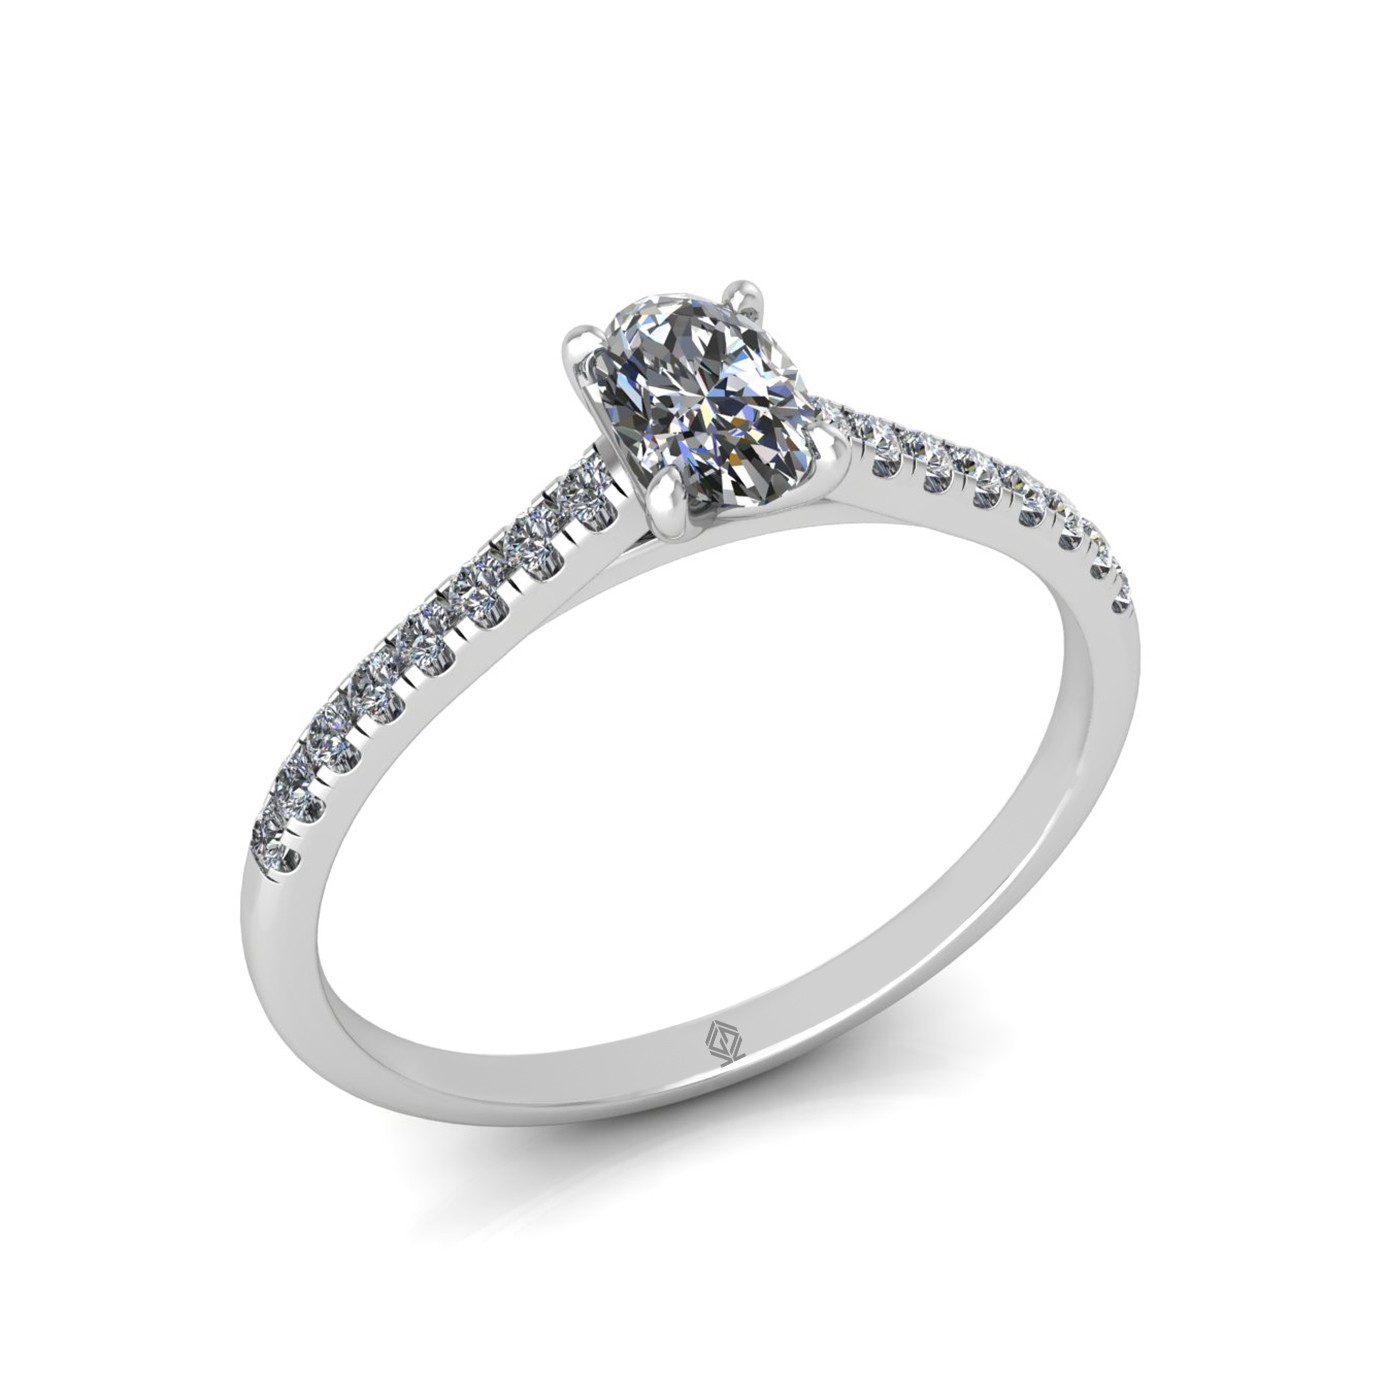 18k white gold  0,30 ct 4 prongs oval cut diamond engagement ring with whisper thin pavÉ set band Photos & images